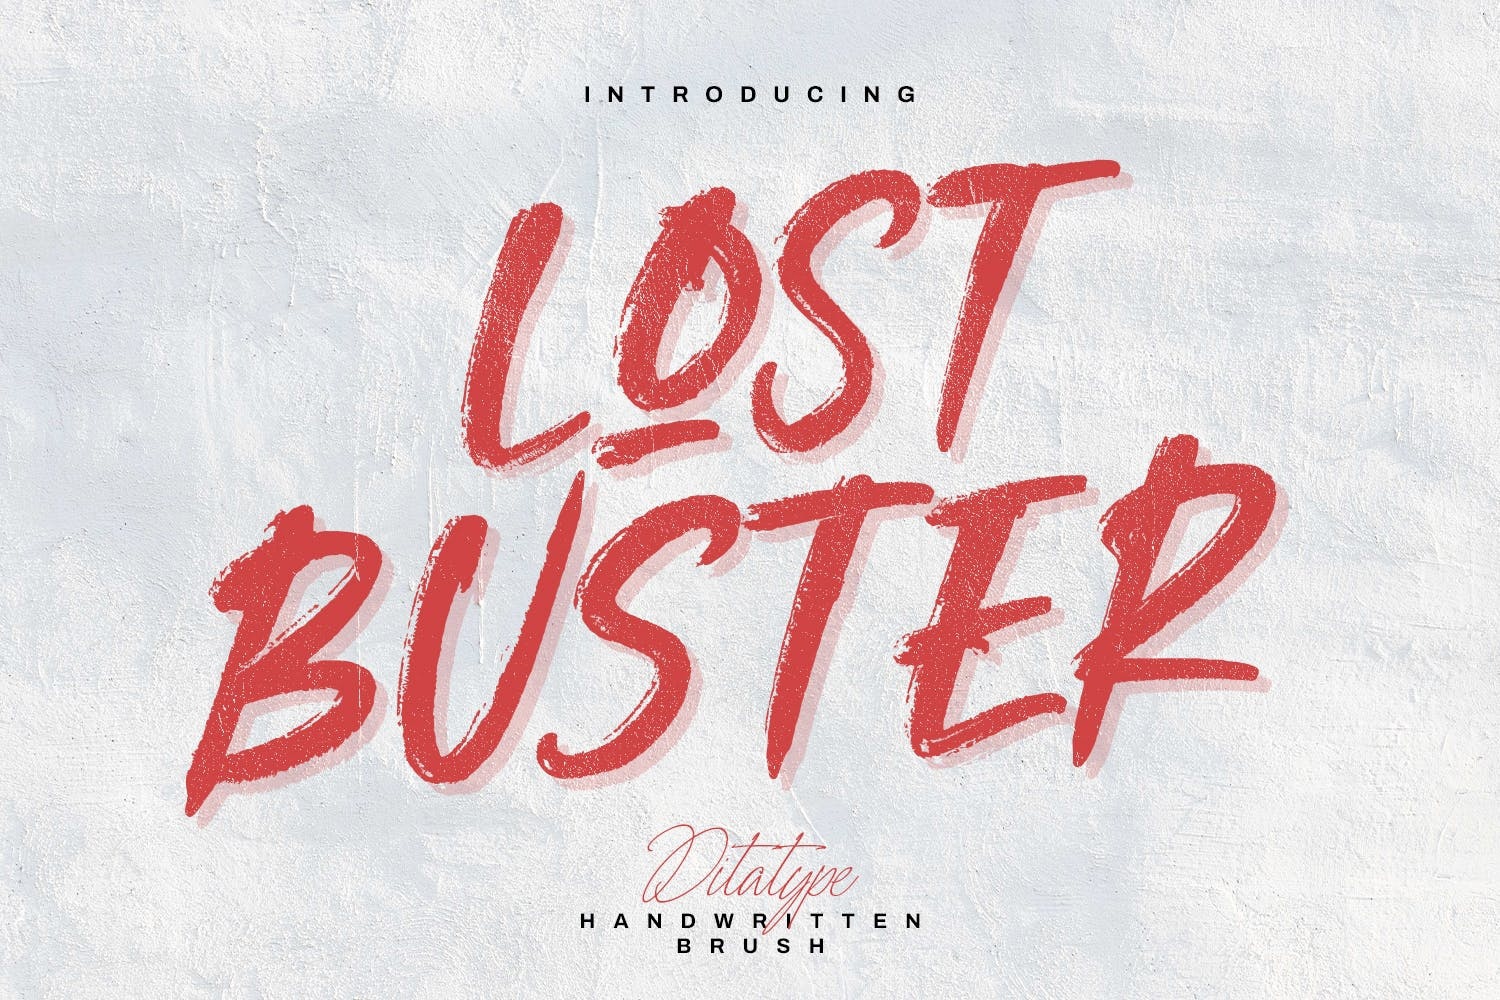 Lost Buster